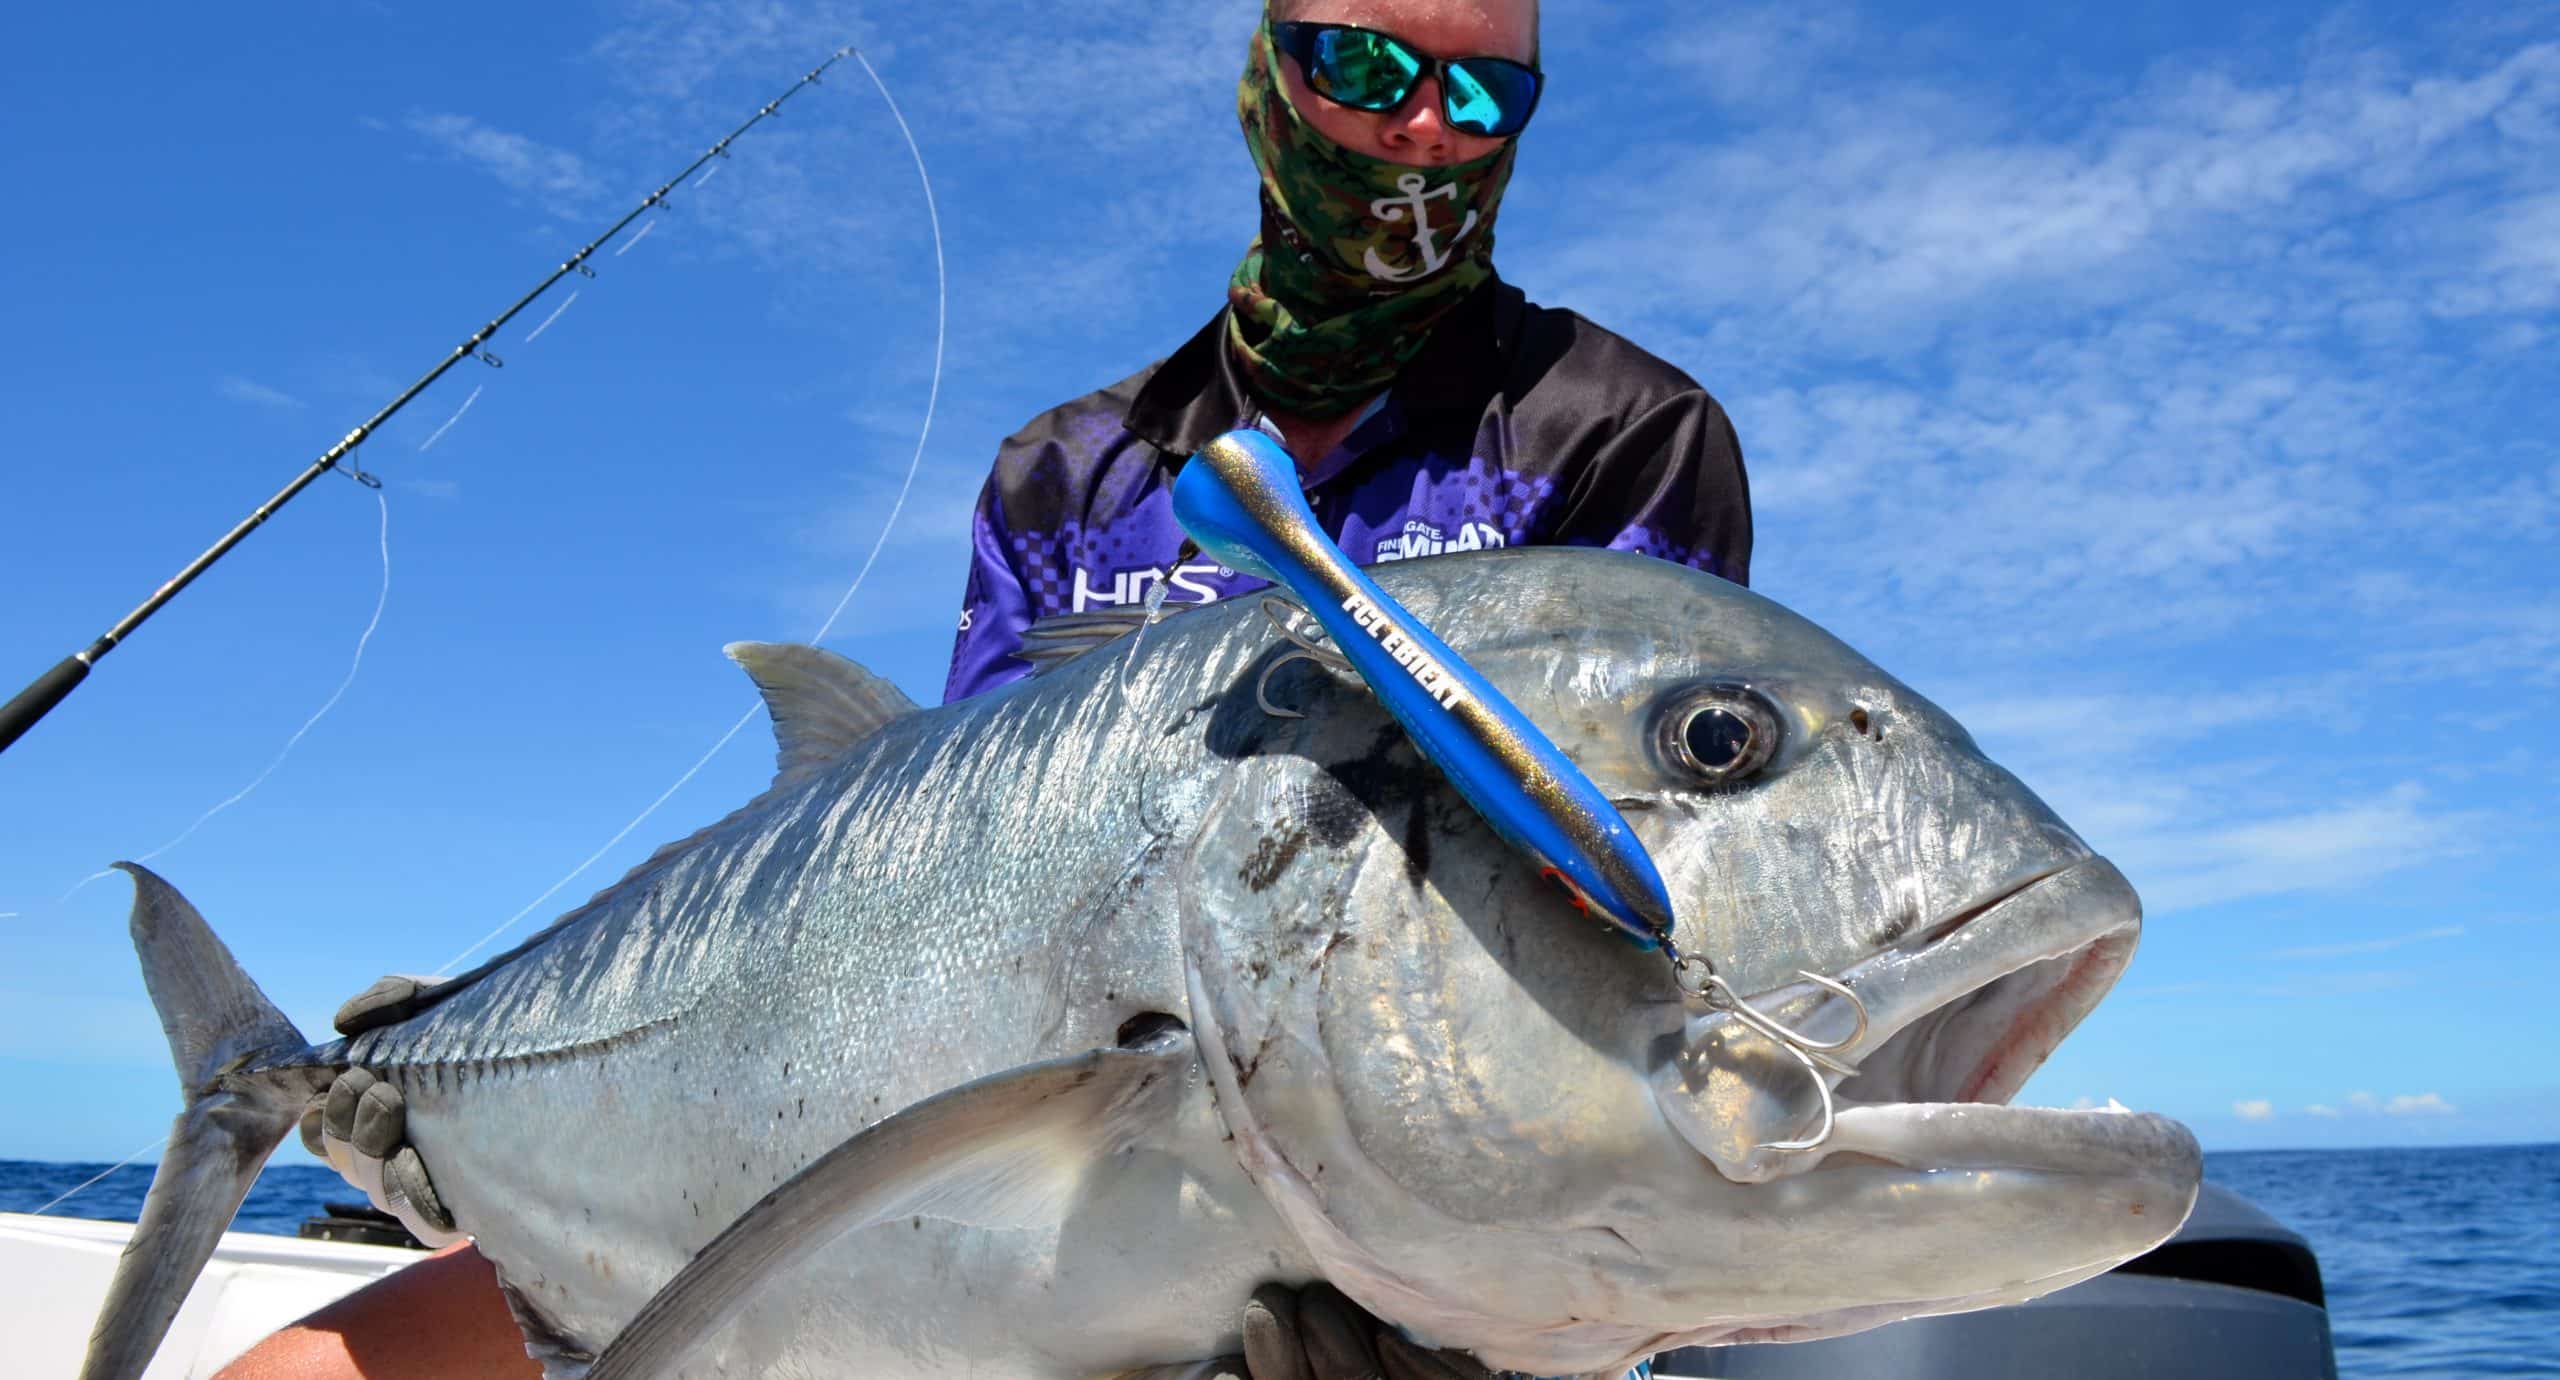 The 8 Best Braided Fishing Lines of 2021